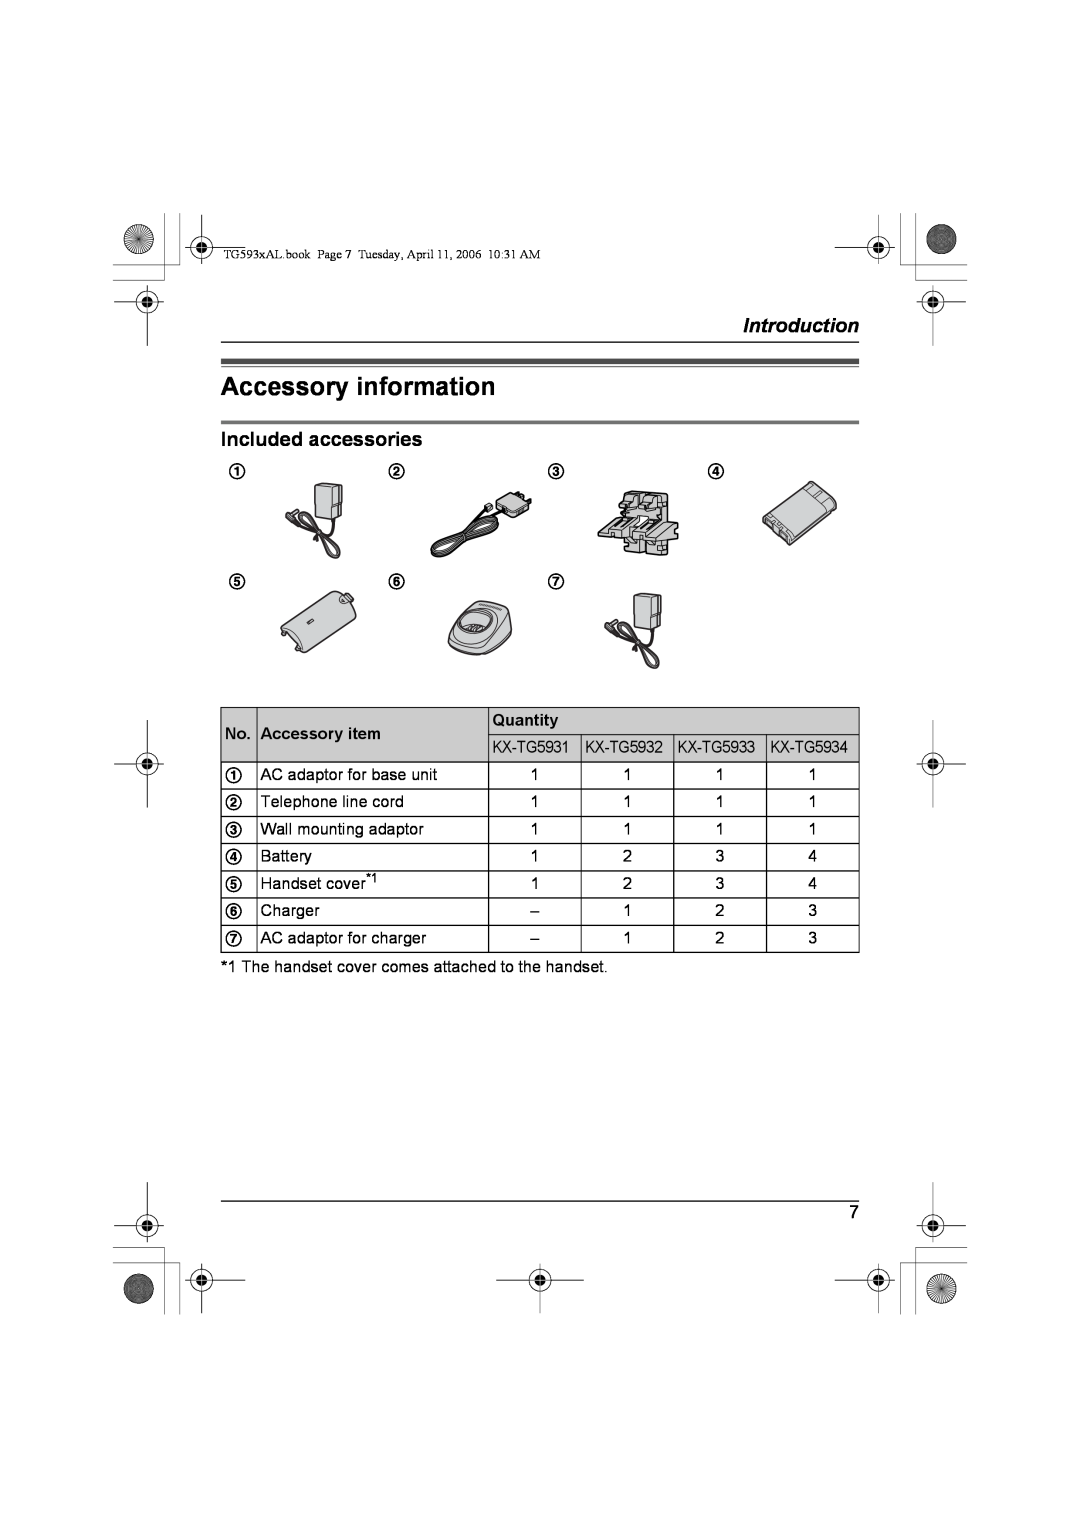 Panasonic KX-TG5934AL Accessory information, Introduction, Included accessories, Accessory item, Quantity, KX-TG5932 